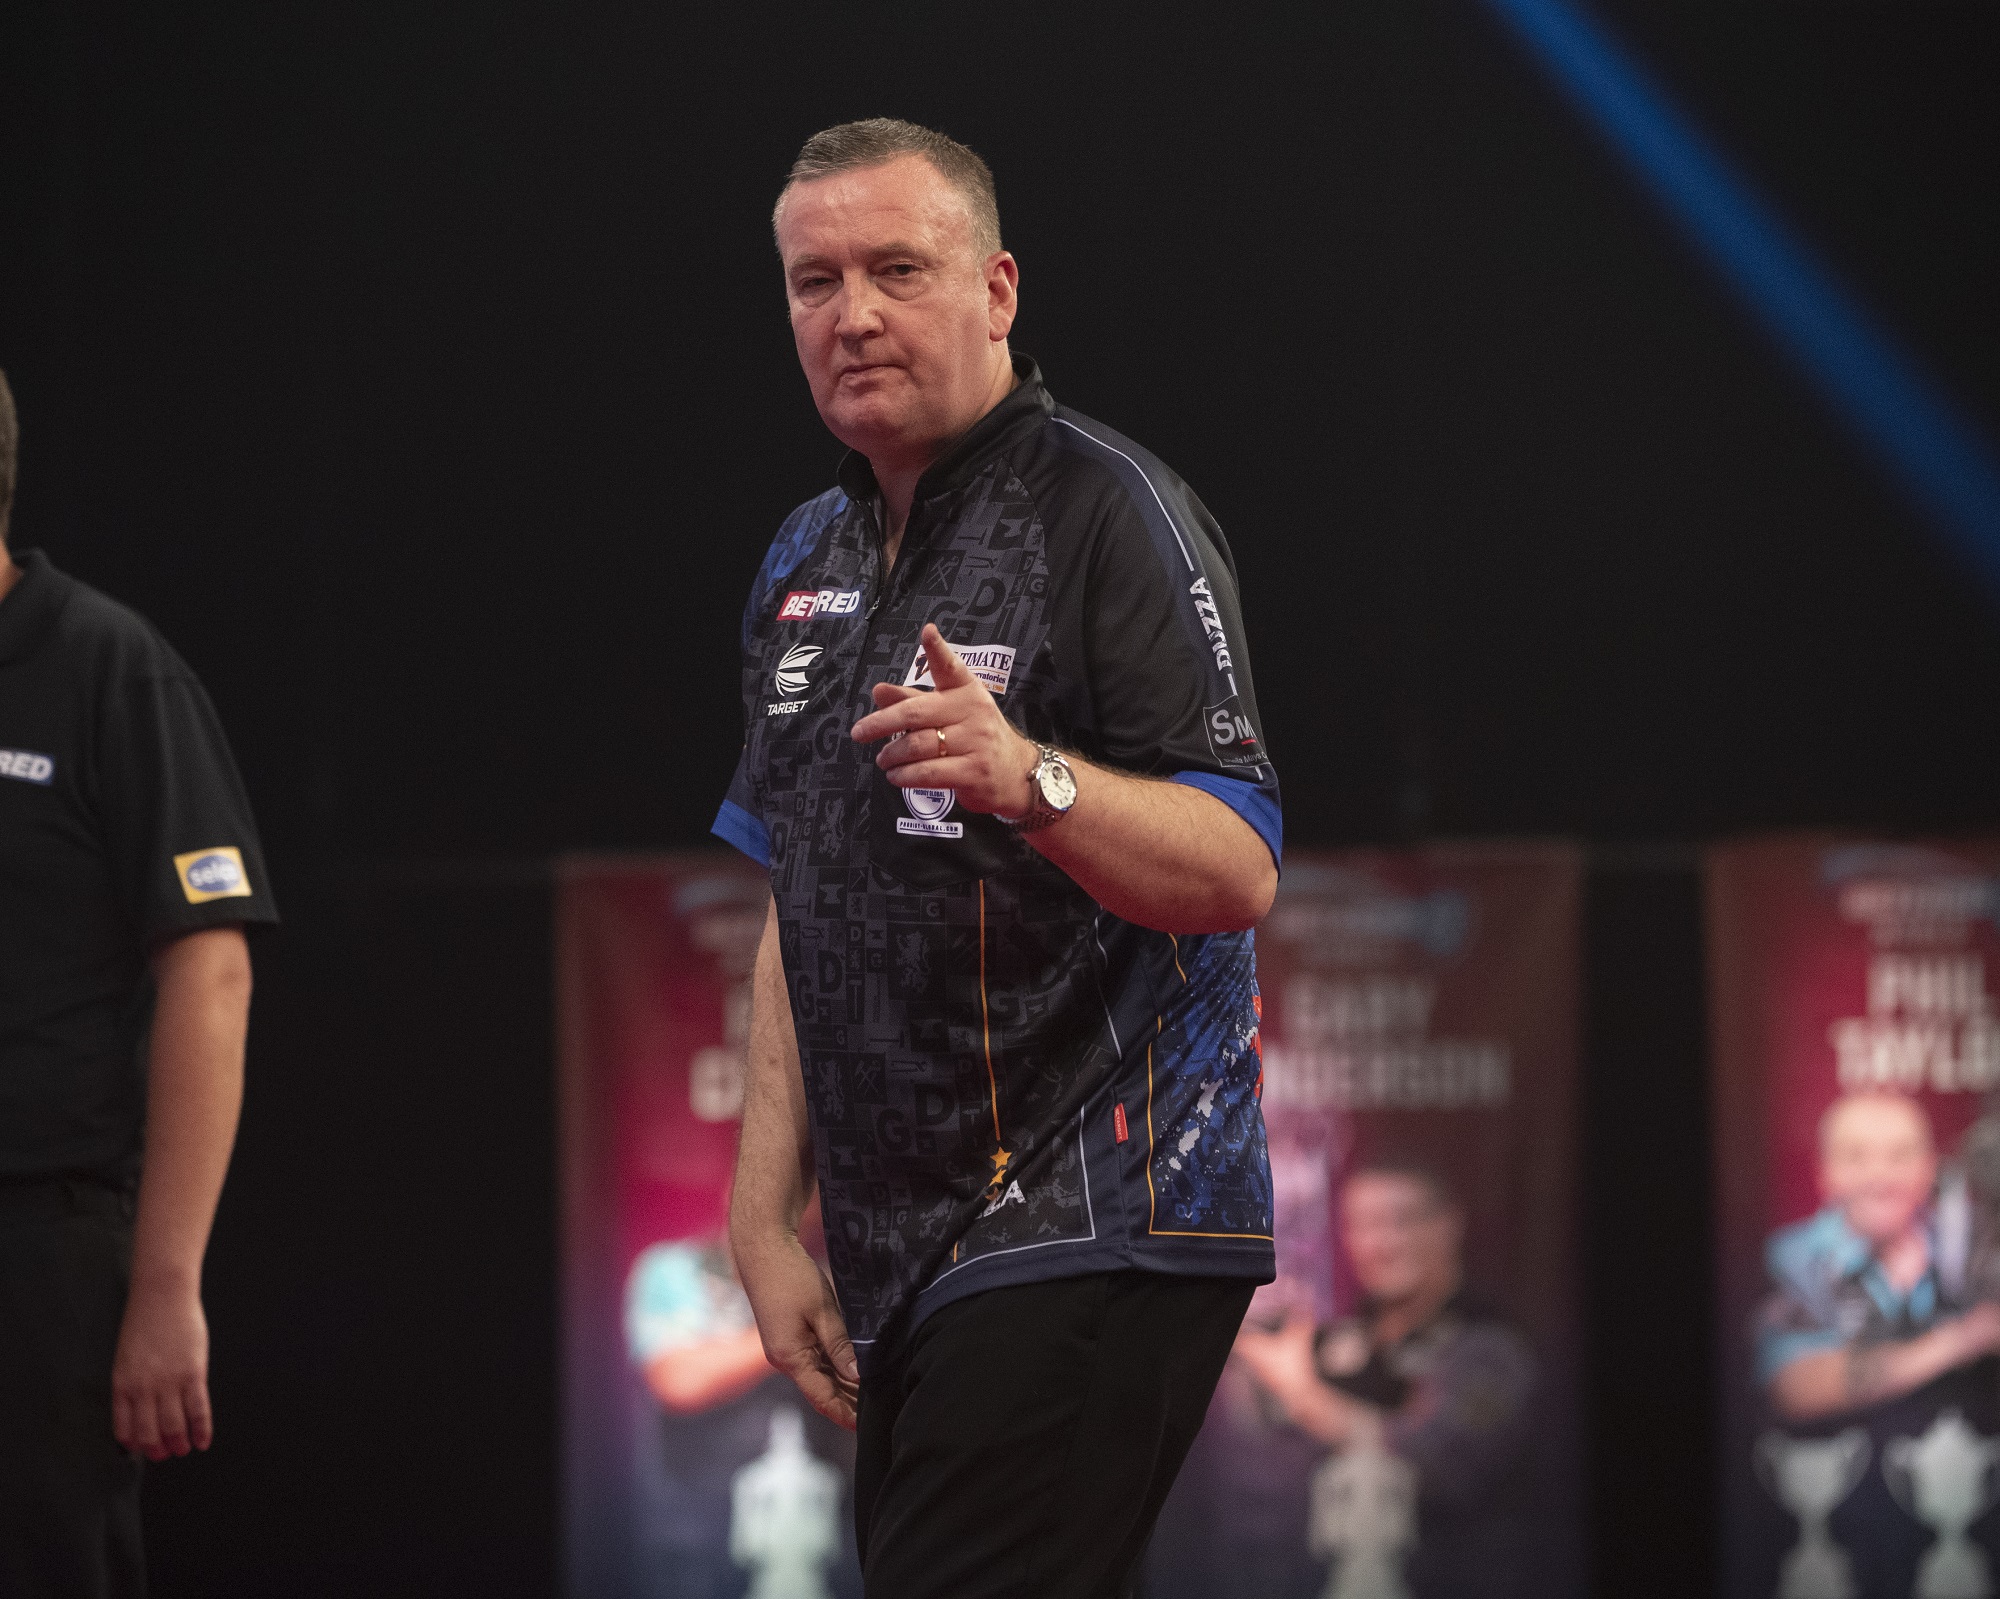 Glen Durrant added to the World Series of Darts Finals